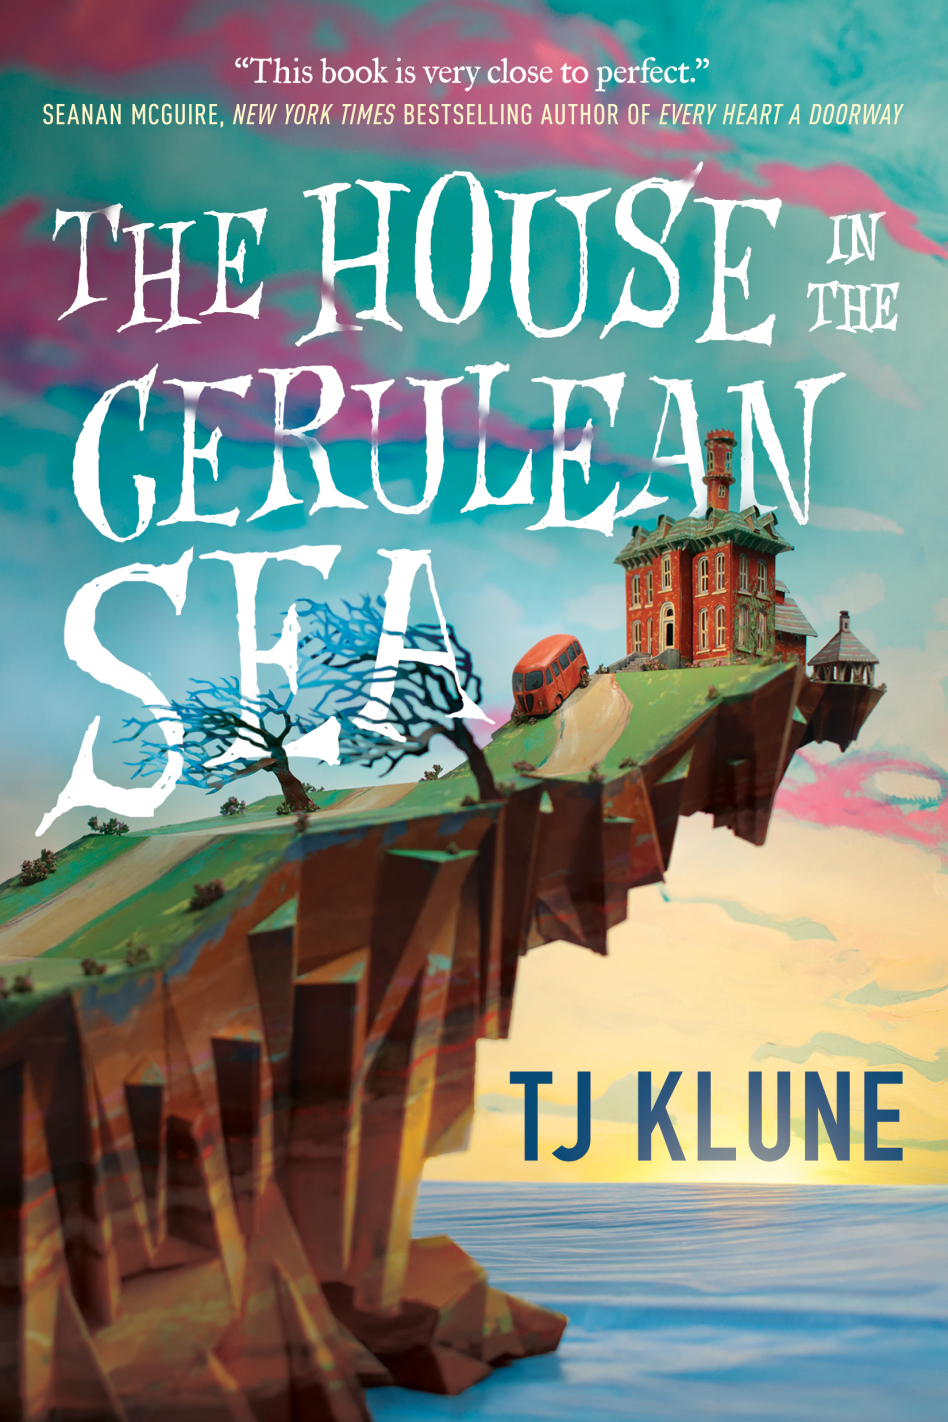 The House in the Gerulean Sea image